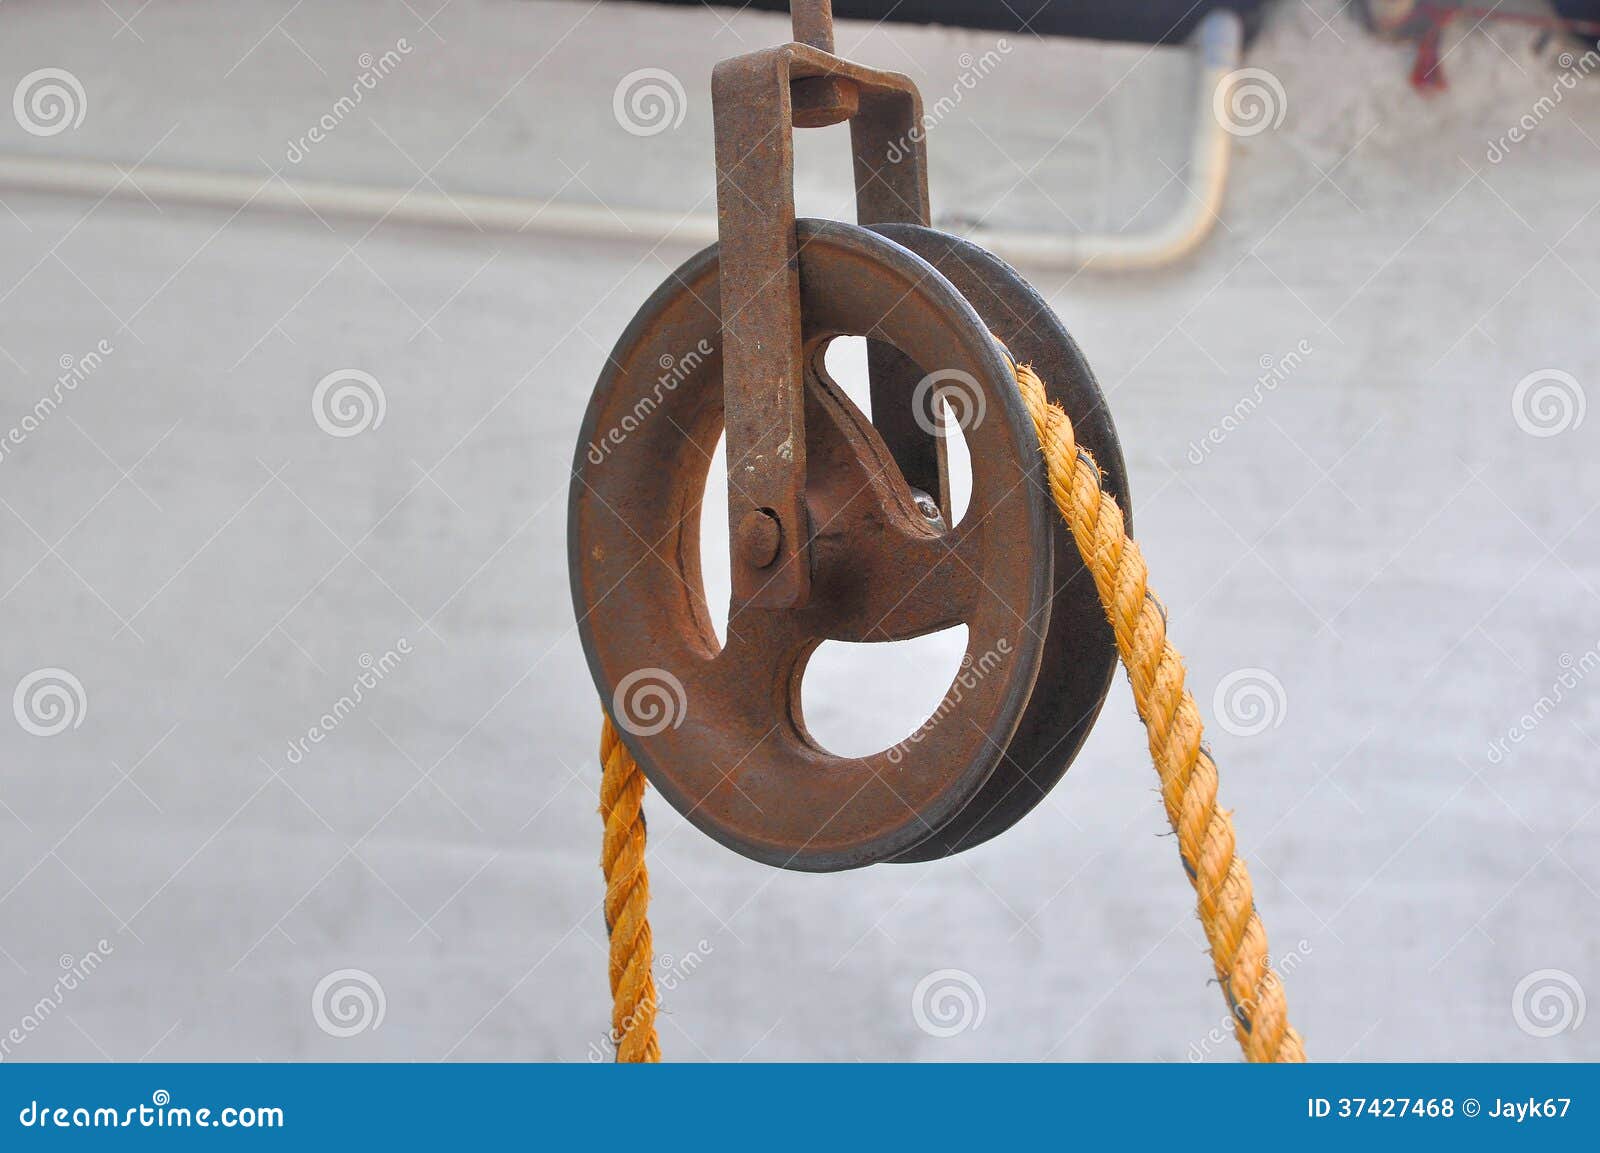 Pulley stock photo. Image of rope, pull, pulley, carry - 37427468